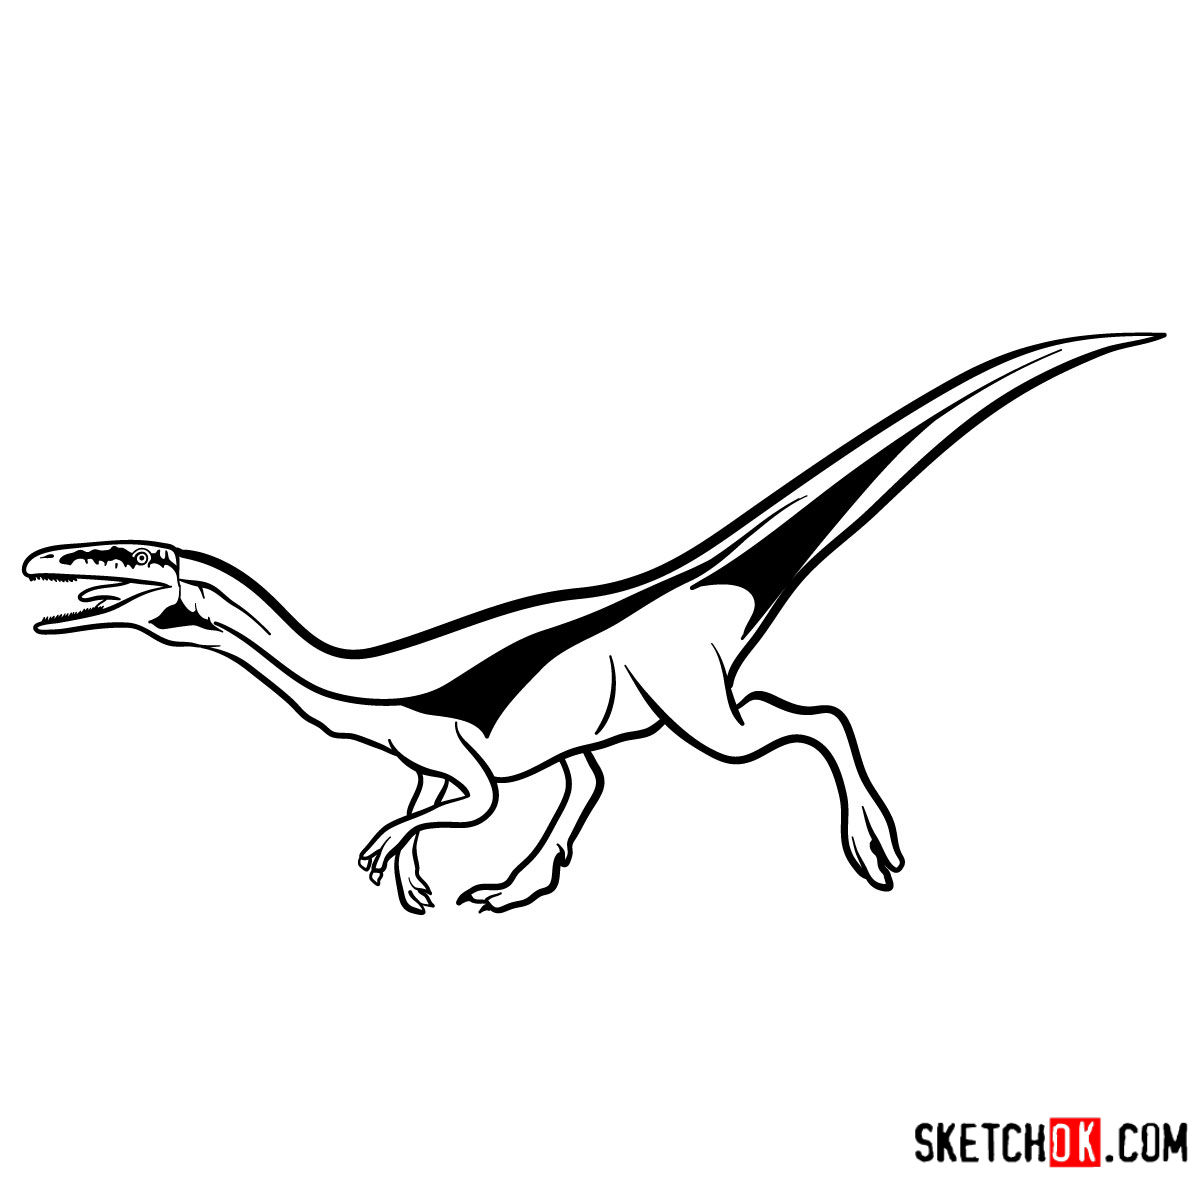 How to draw a Compsognathus